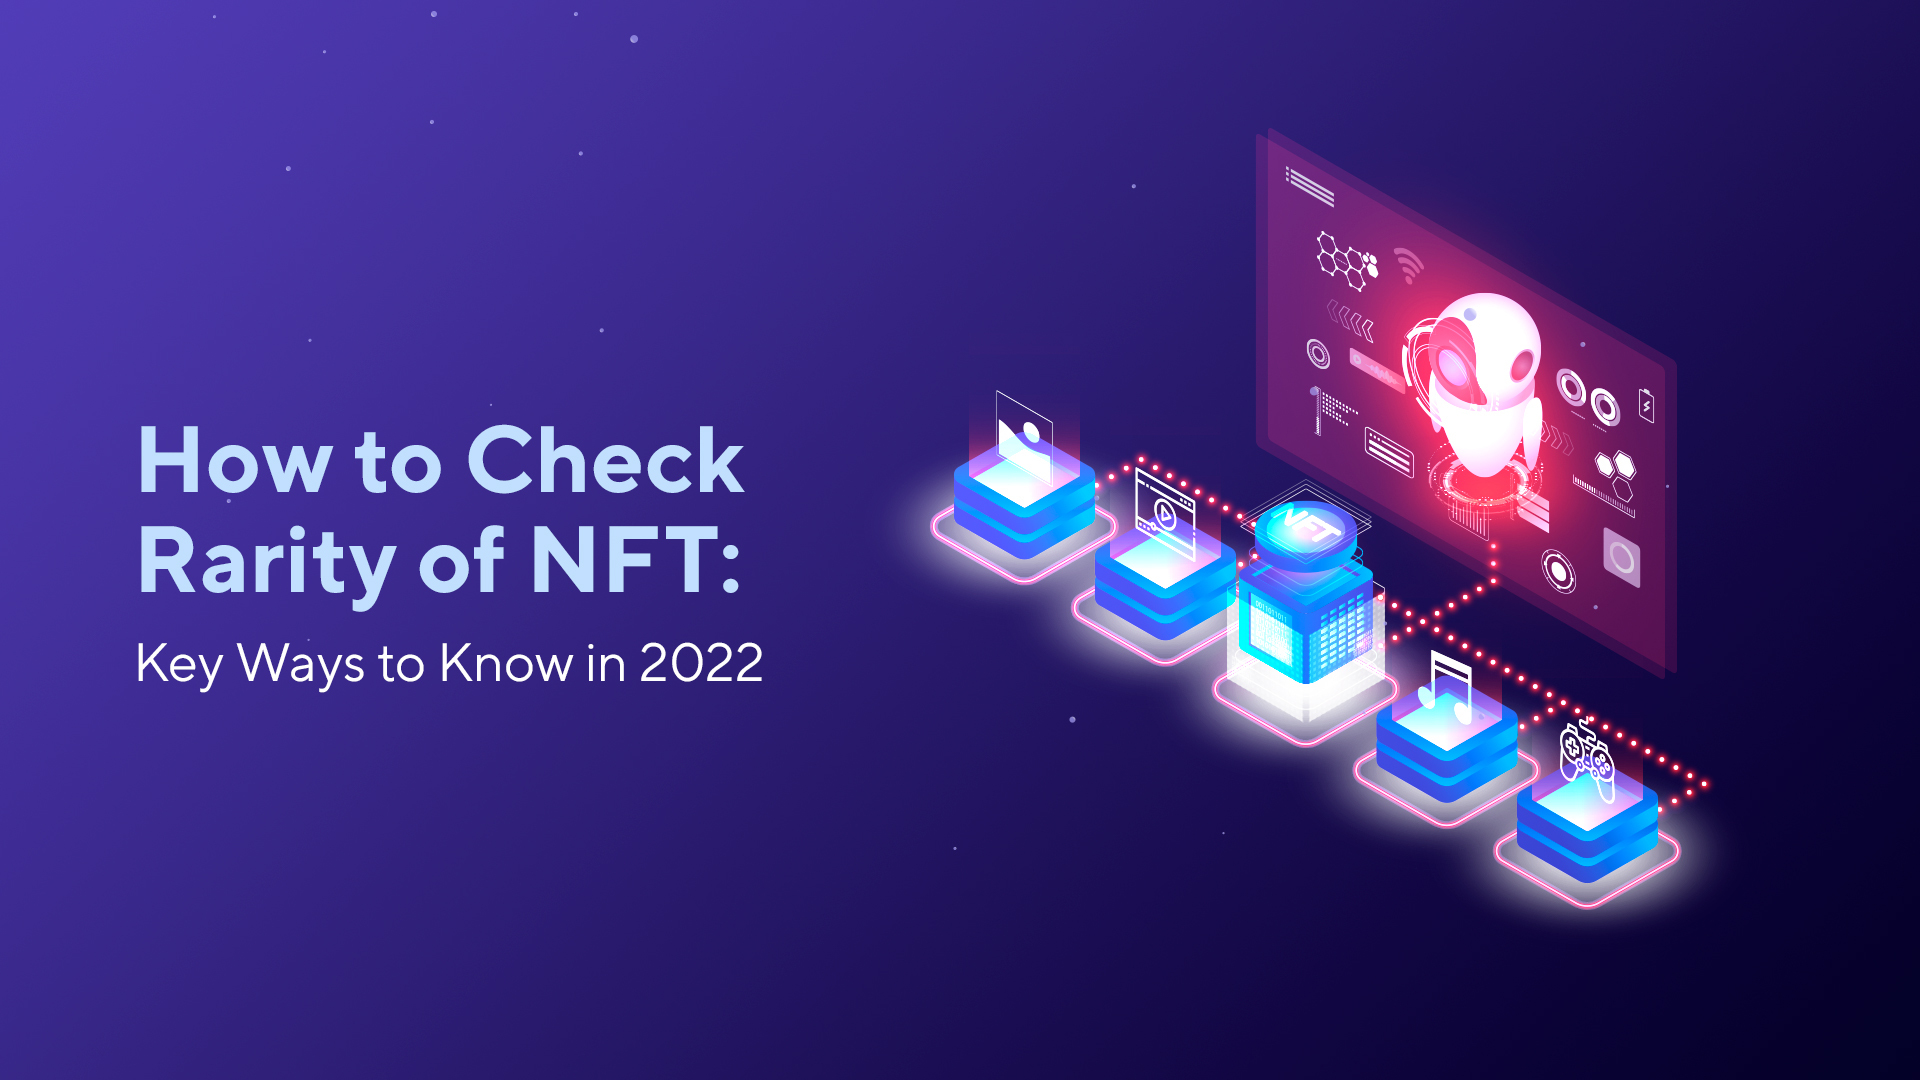 How to Check Rarity of NFT: Key Ways to Know in 2022